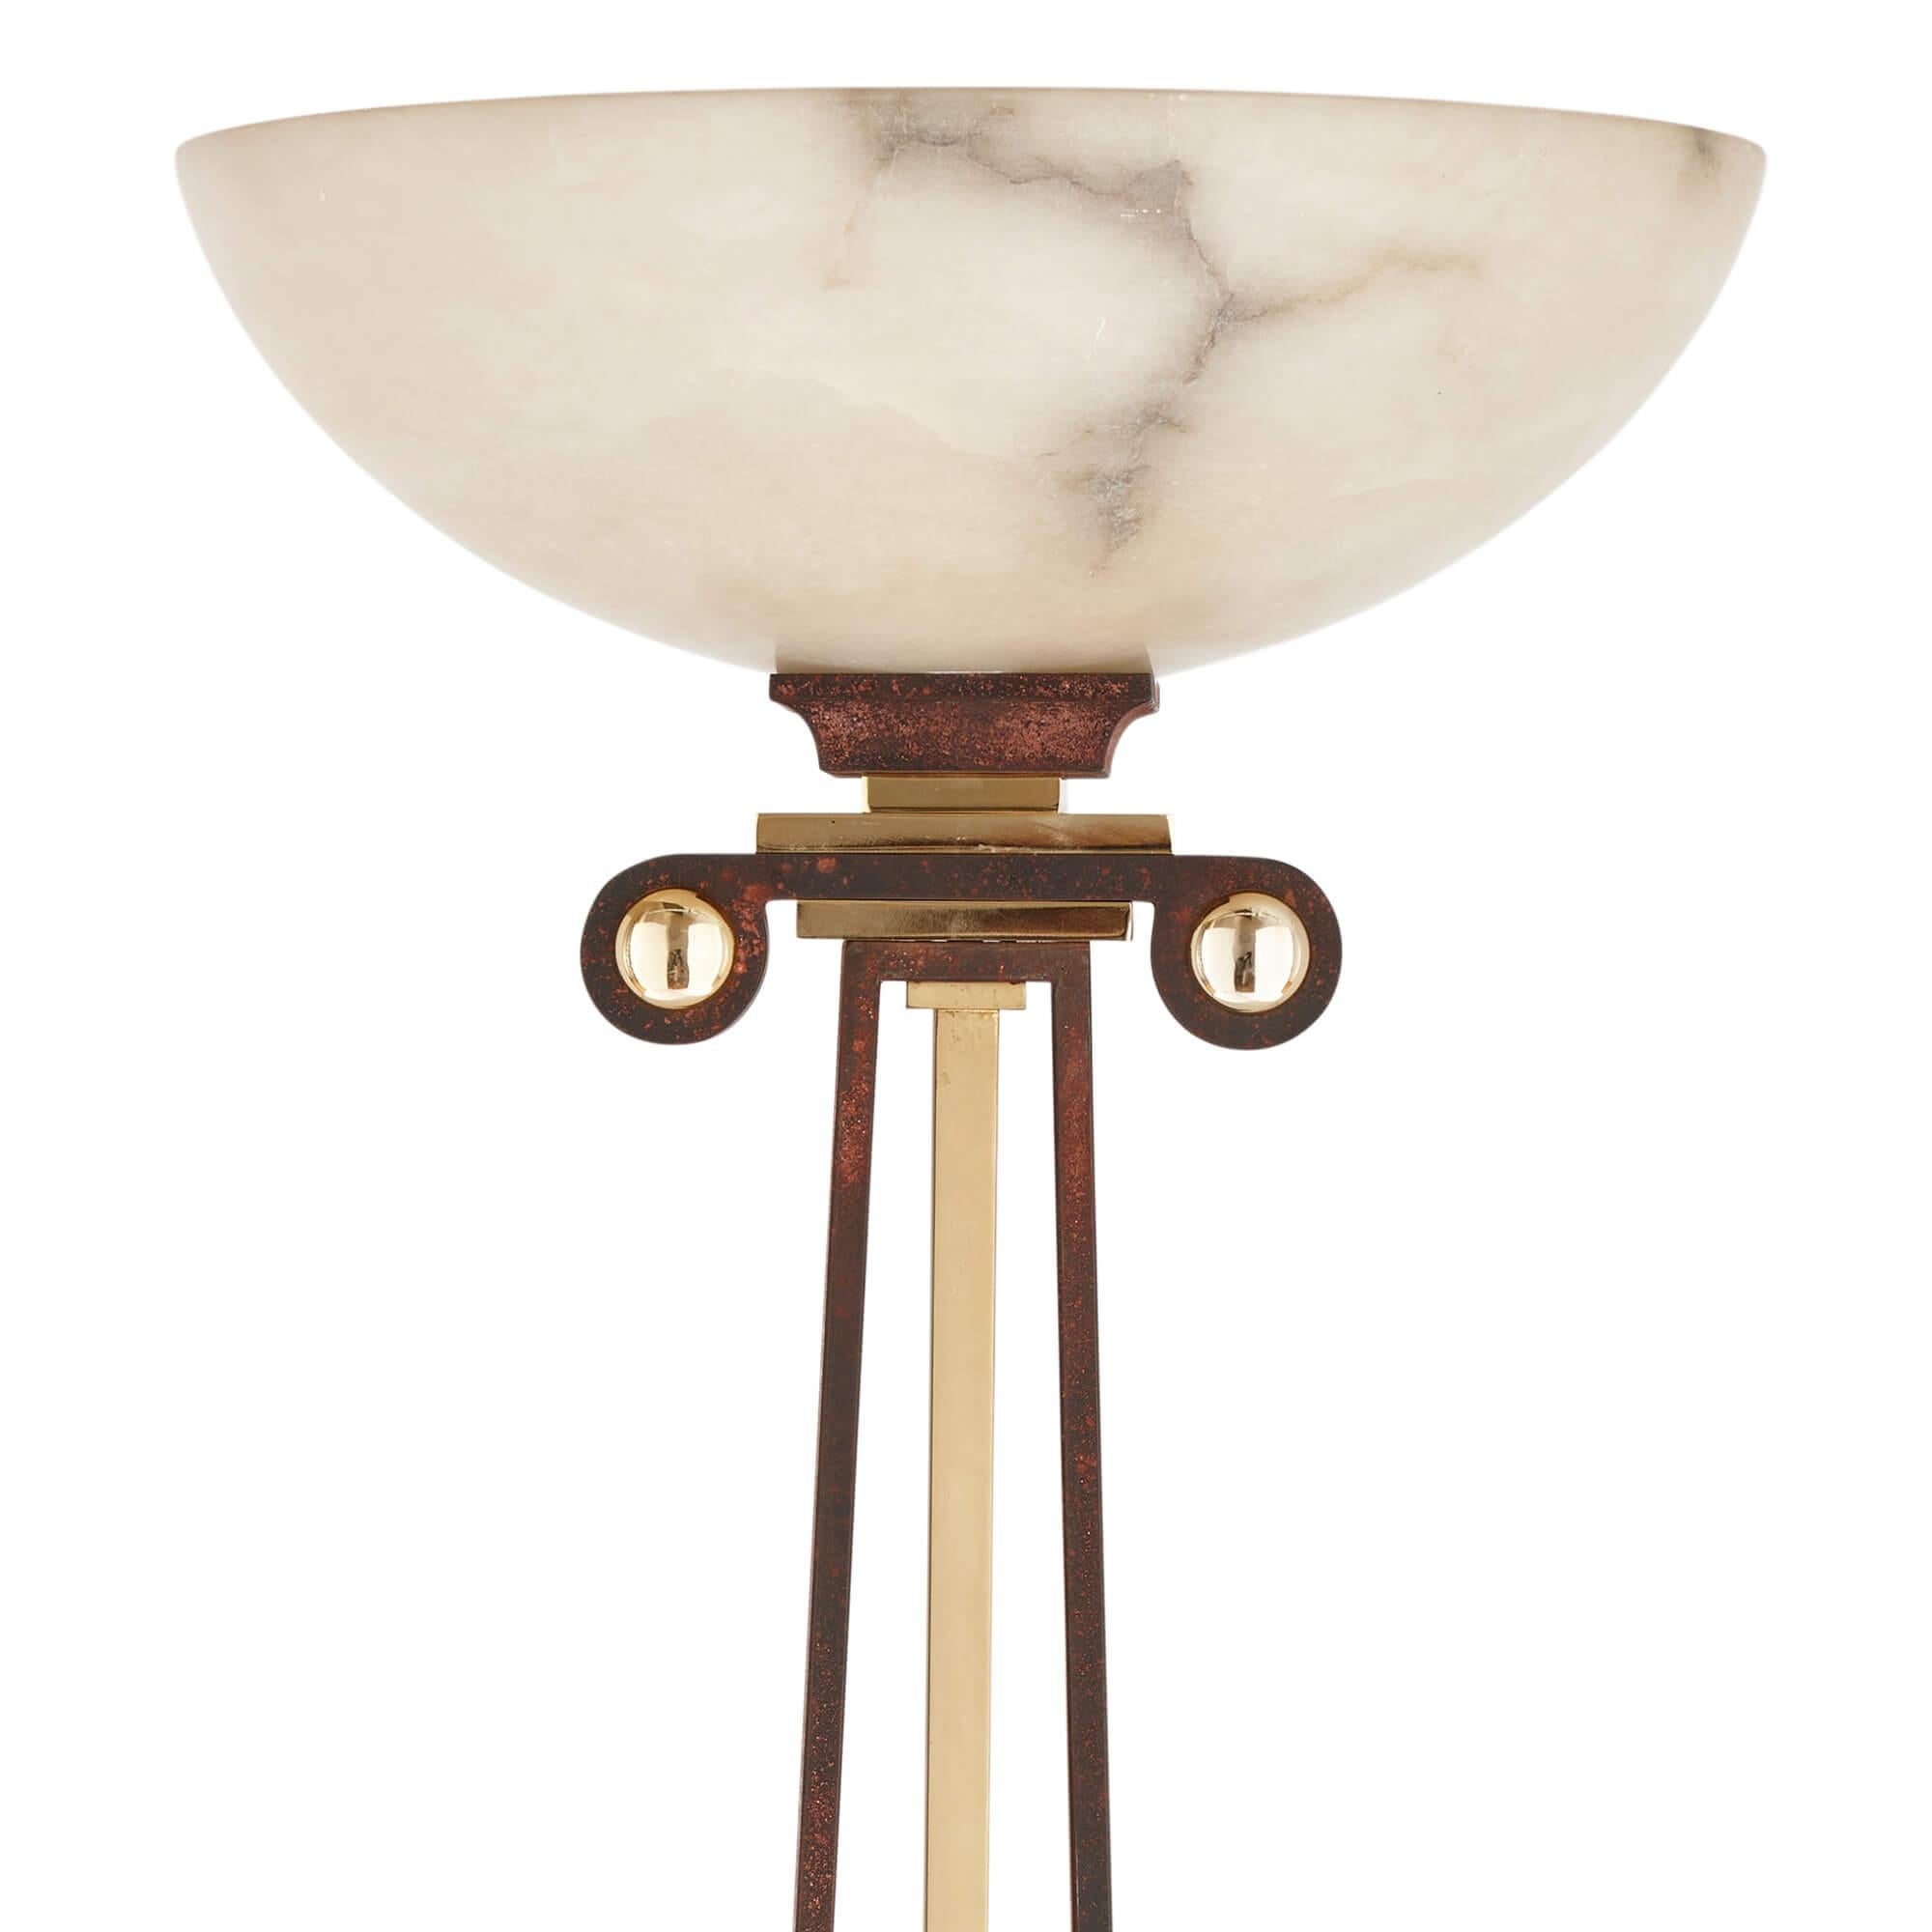 Alabaster, gilt metal and patinated iron floor lamp 
Continental, 20th Century
Height 185cm, diameter 40cm

Inspired by Classical Greek architecture, this modern floor lamp would be a magnificent addition to both contemporary and traditional